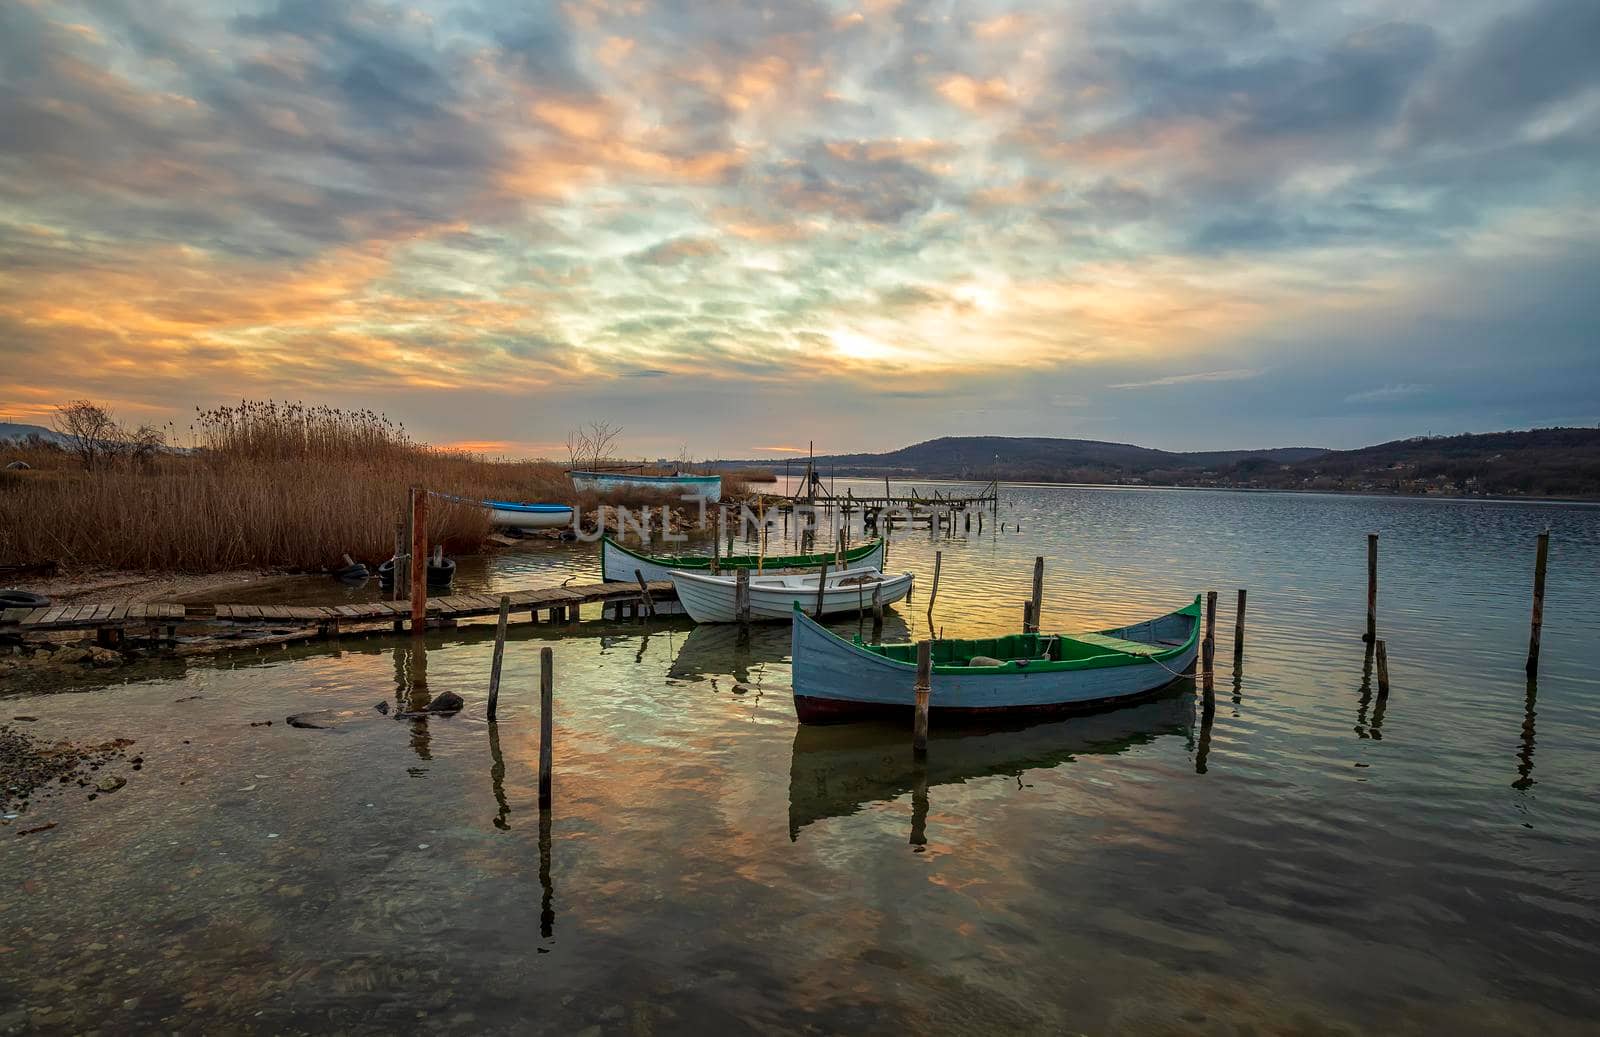 The tranquil afternoon on a lake with a wooden pier and boats at colorful sky. by EdVal